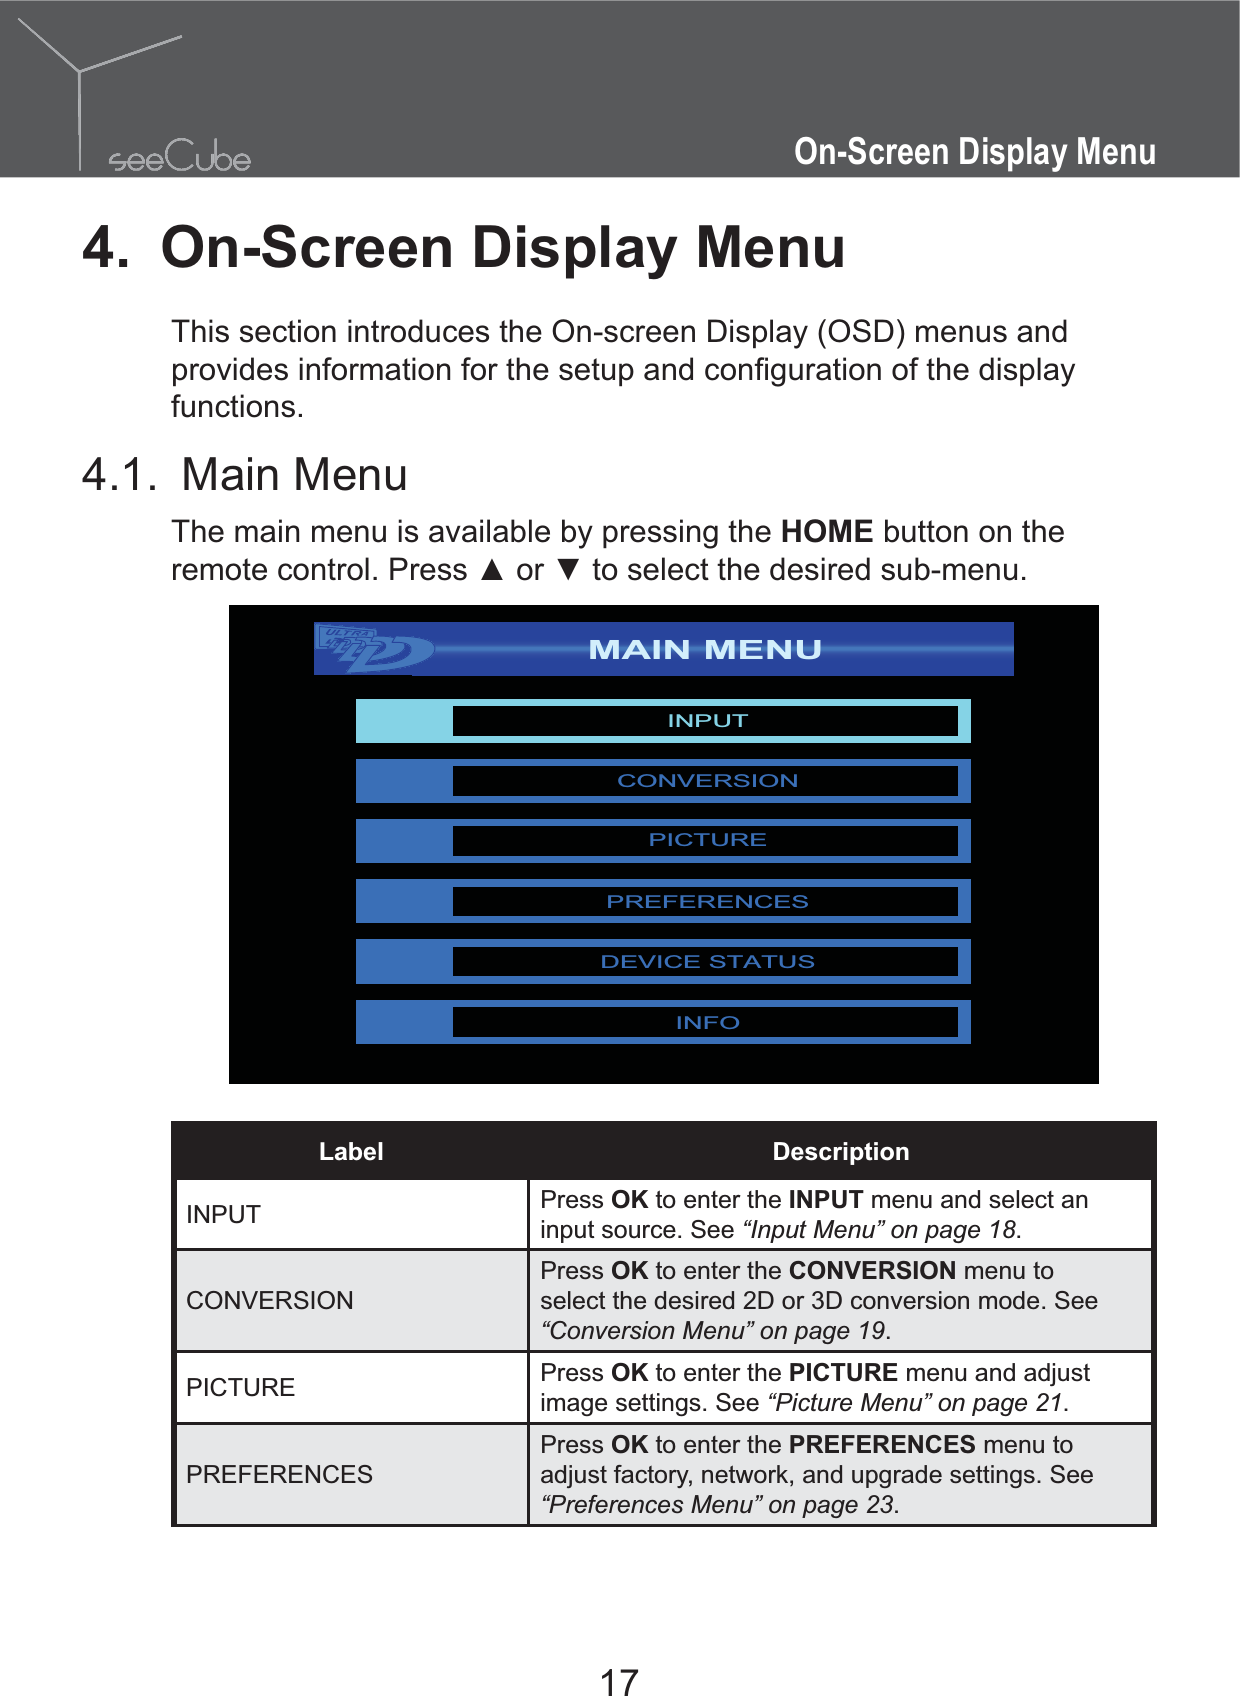 17On-Screen Display Menu4.  On-Screen Display MenuThis section introduces the On-screen Display (OSD) menus and functions.4.1. Main MenuThe main menu is available by pressing the HOME button on the MAIN MENUINPUTCONVERSIONPICTUREPREFERENCESDEVICE STATUSINFOLabel DescriptionINPUT Press OK to enter the INPUT menu and select an input source. See “Input Menu” on page 18.CONVERSIONPress OK to enter the CONVERSION menu to select the desired 2D or 3D conversion mode. See “Conversion Menu” on page 19.PICTURE Press OK to enter the PICTURE menu and adjust image settings. See “Picture Menu” on page 21.PREFERENCESPress OK to enter the PREFERENCES menu to adjust factory, network, and upgrade settings. See “Preferences Menu” on page 23.